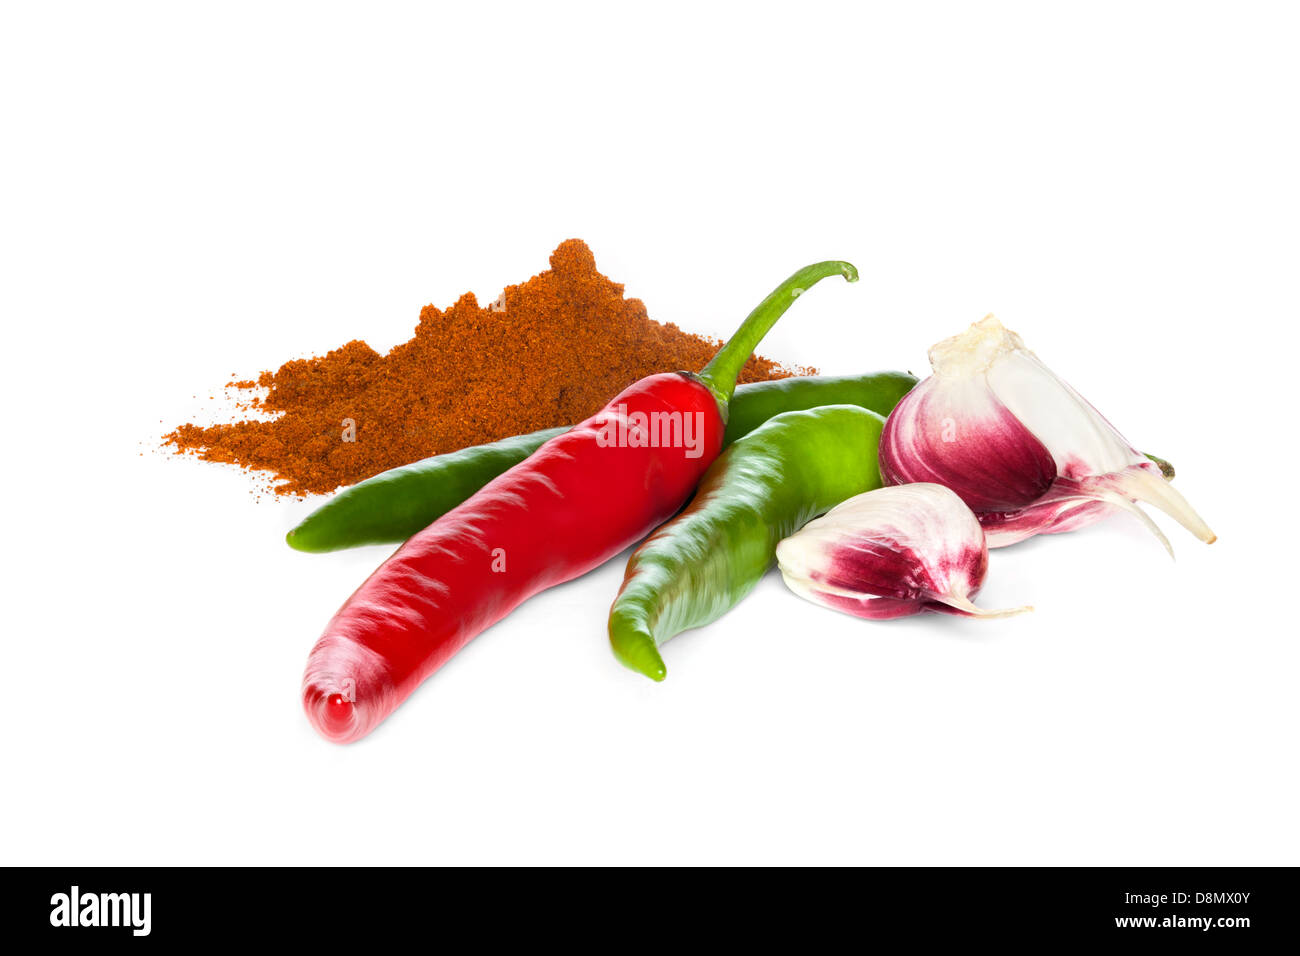 Spanish seasoning of chilli, garlic and paprika on a white background with soft natural shadow. Front to back focus. Stock Photo